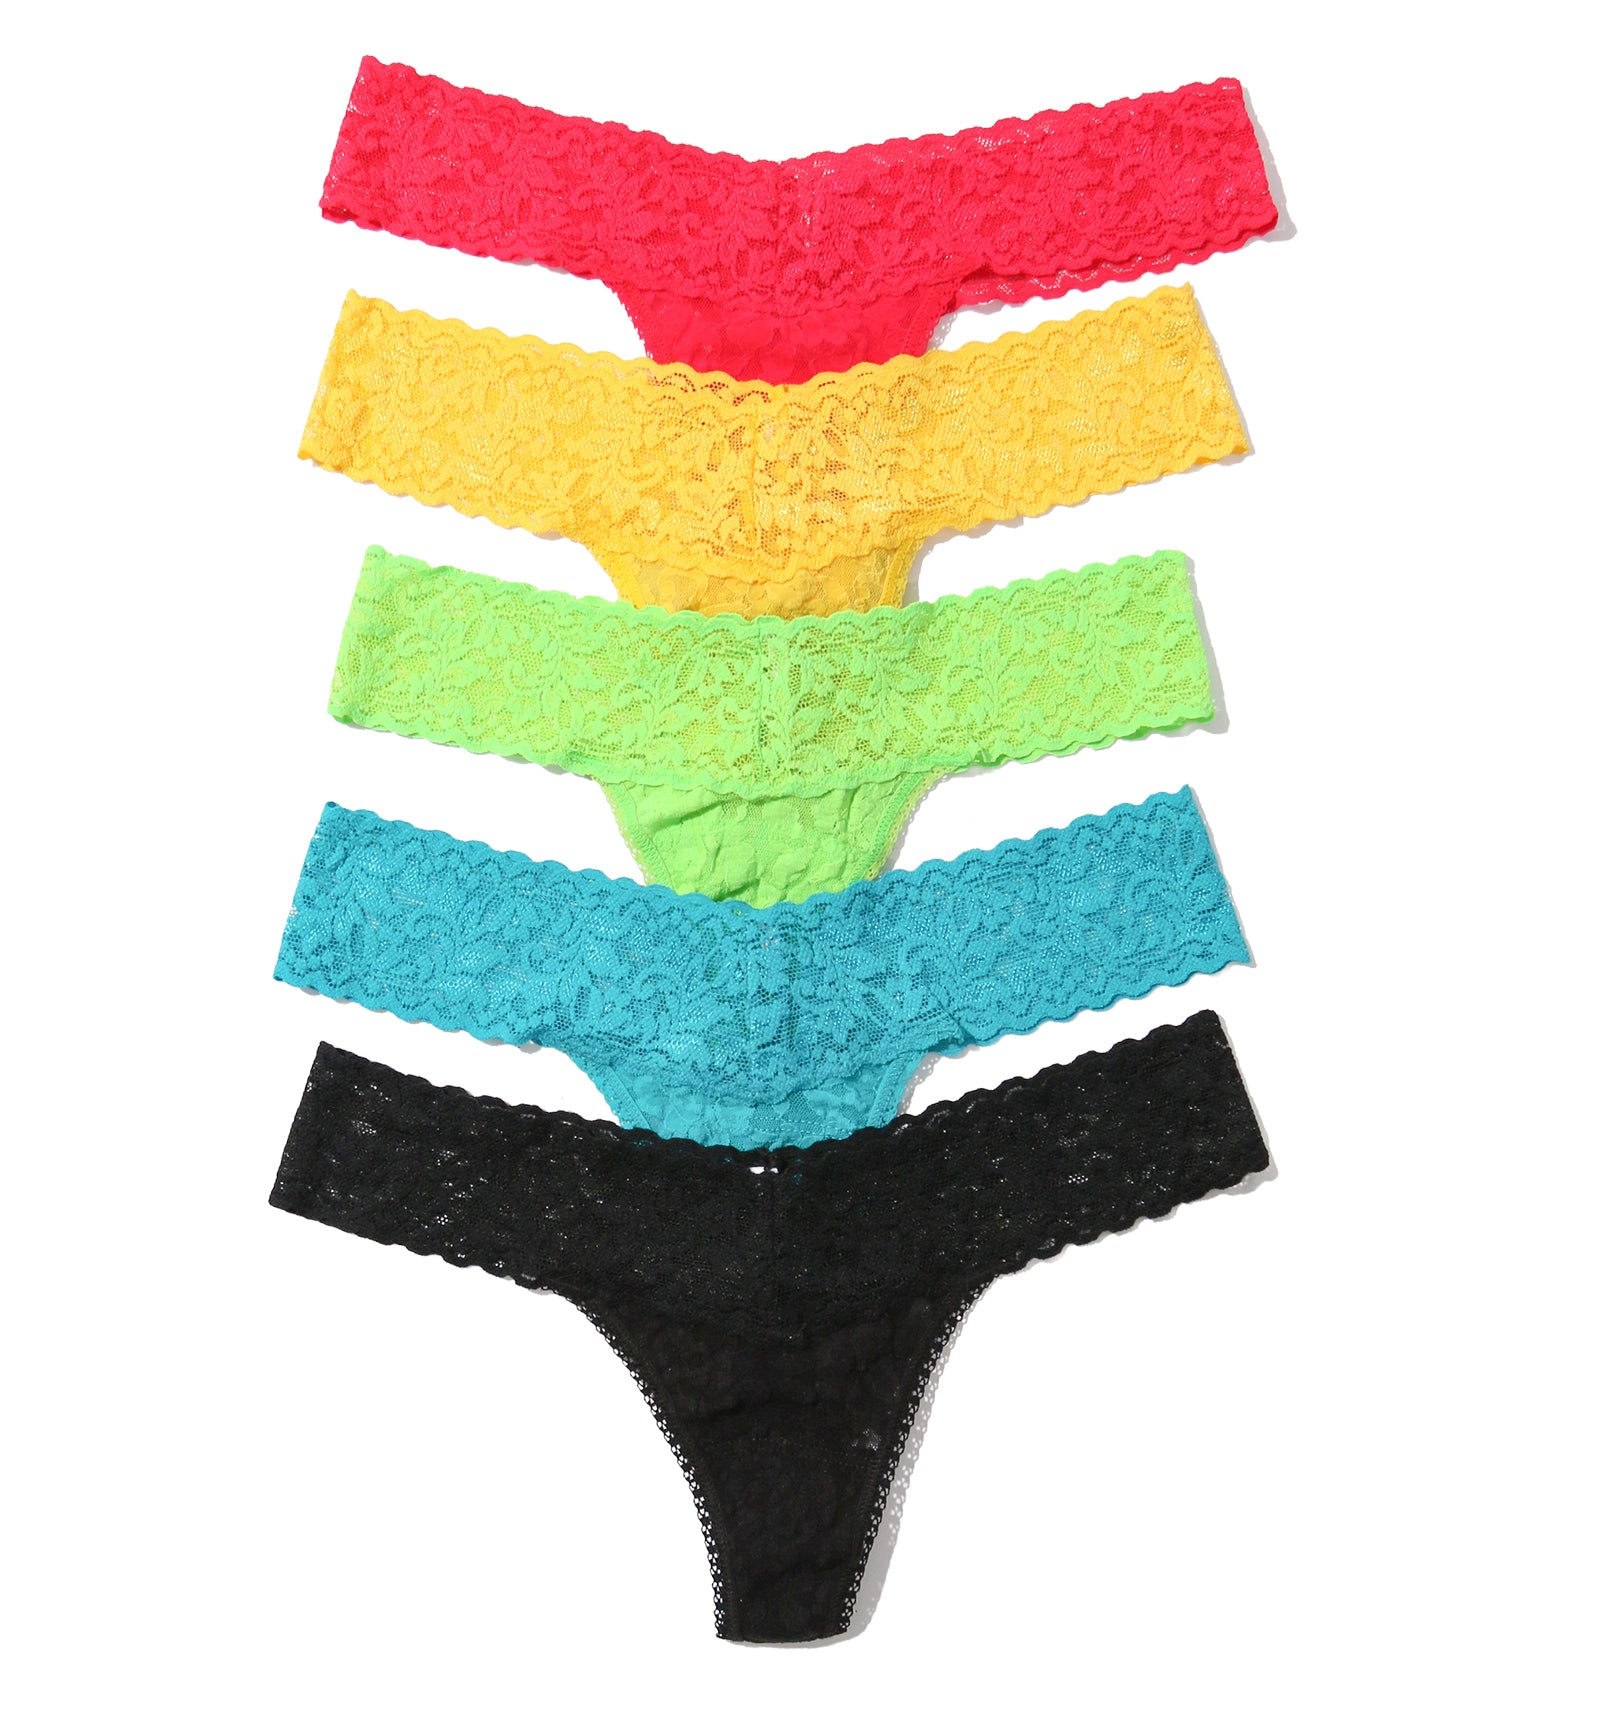 Hanky Panky 5-PACK Signature Lace Low Rise Thong (49115PK),Extra Spice - Extra Spice,One Size